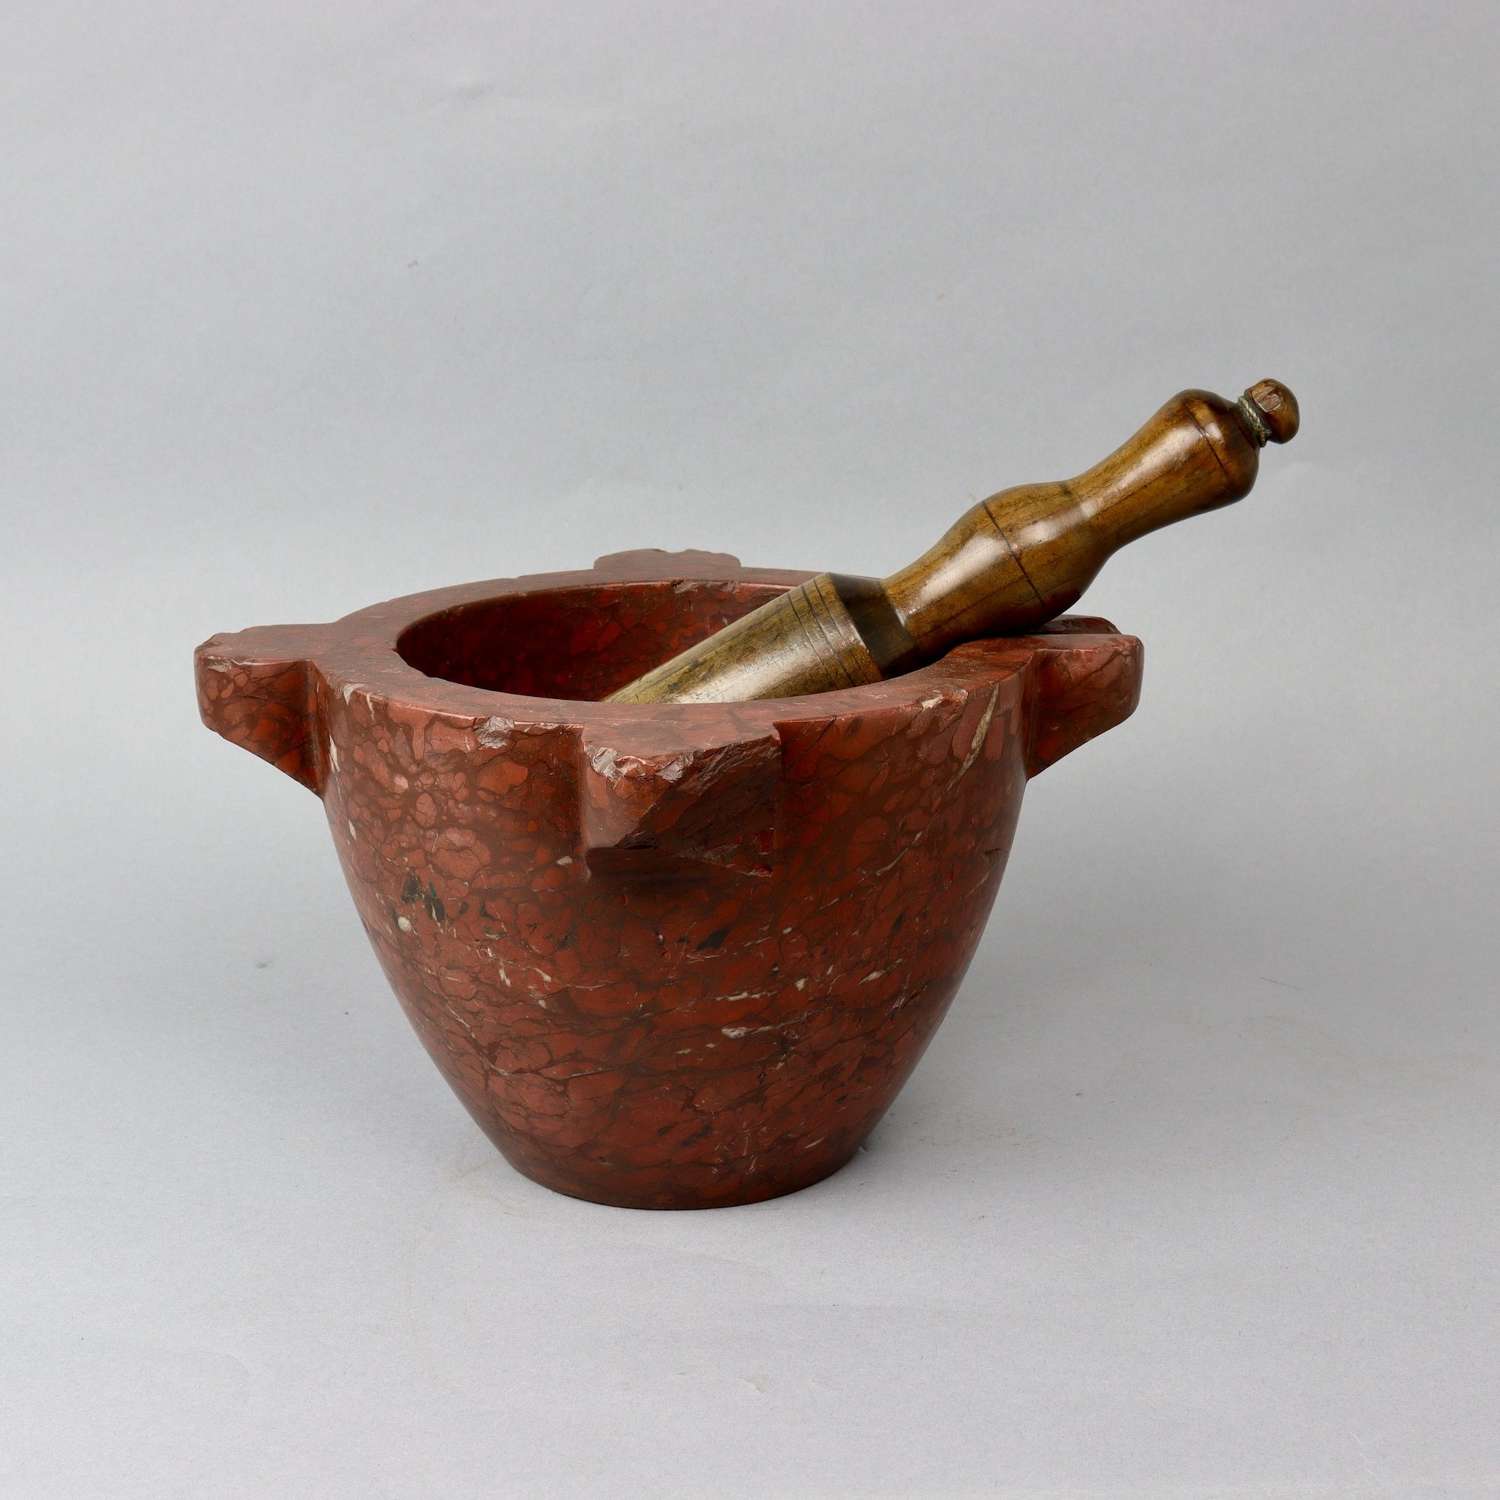 Unusual, Dark Red Marble Mortar with Fruitwood Pestle